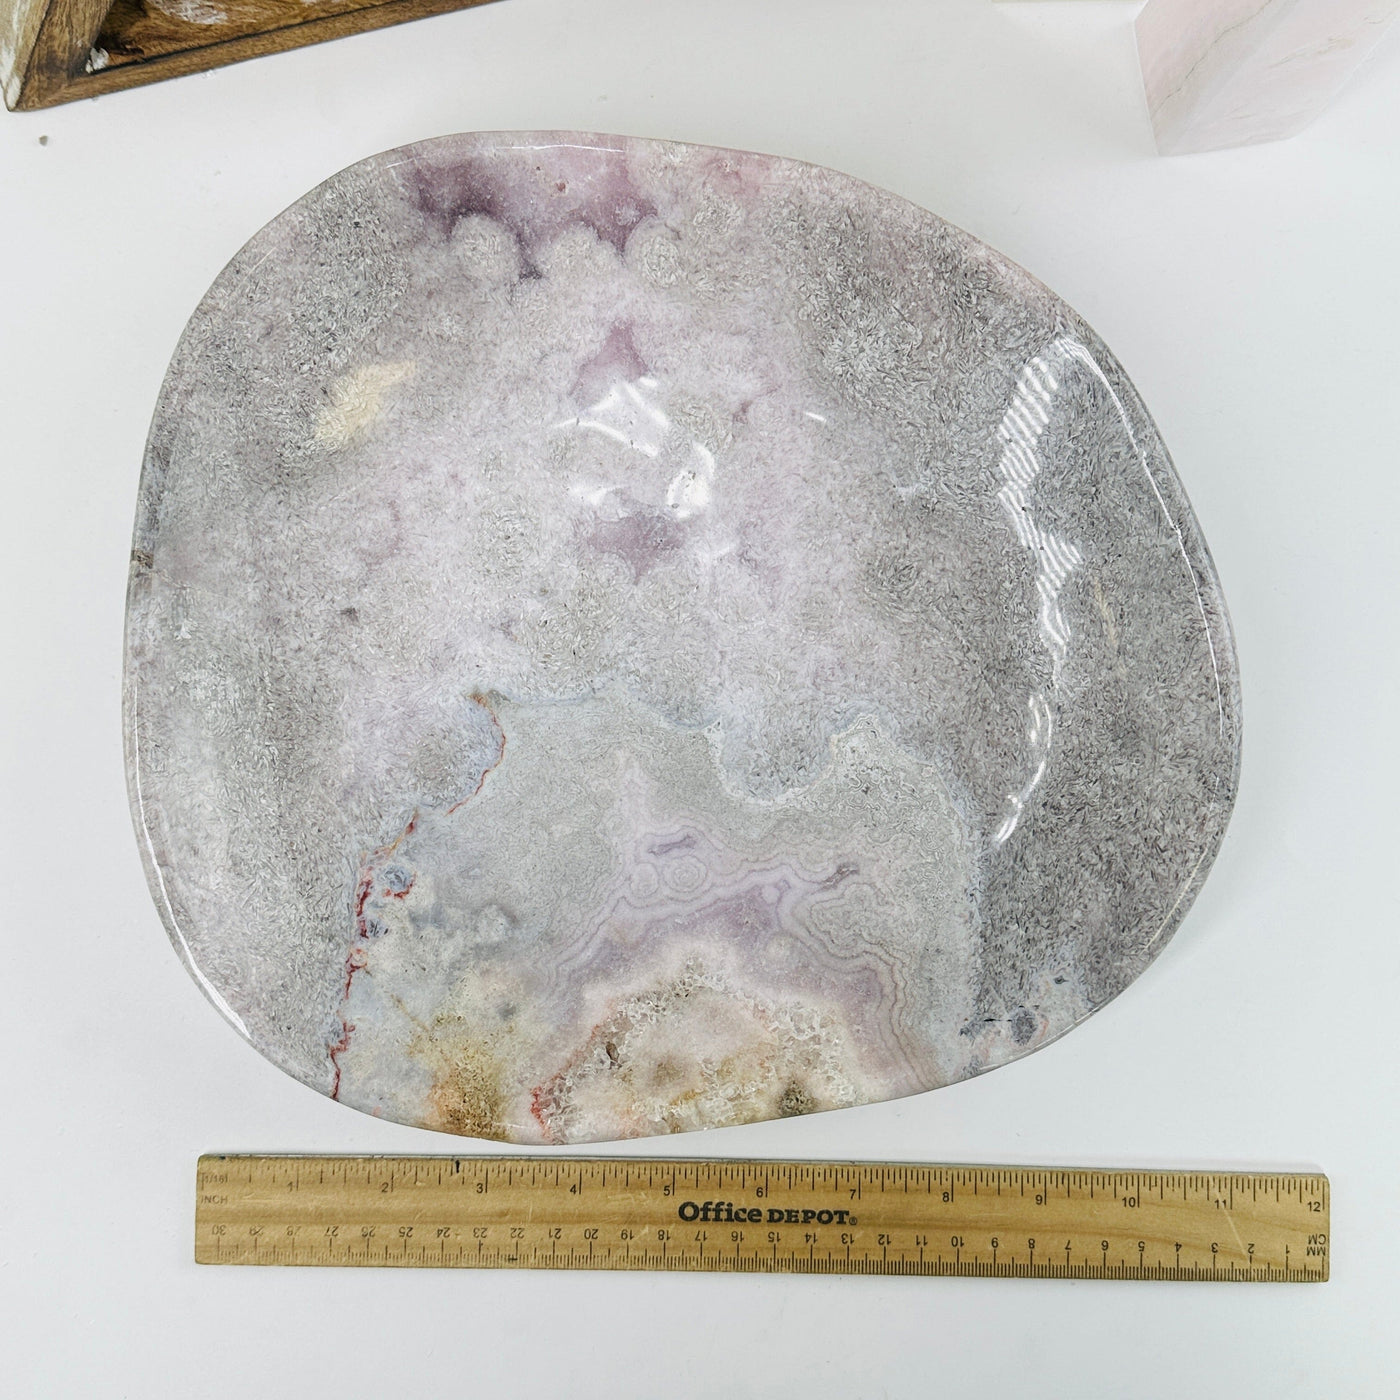 pink amethyst plate next to a ruler for size reference